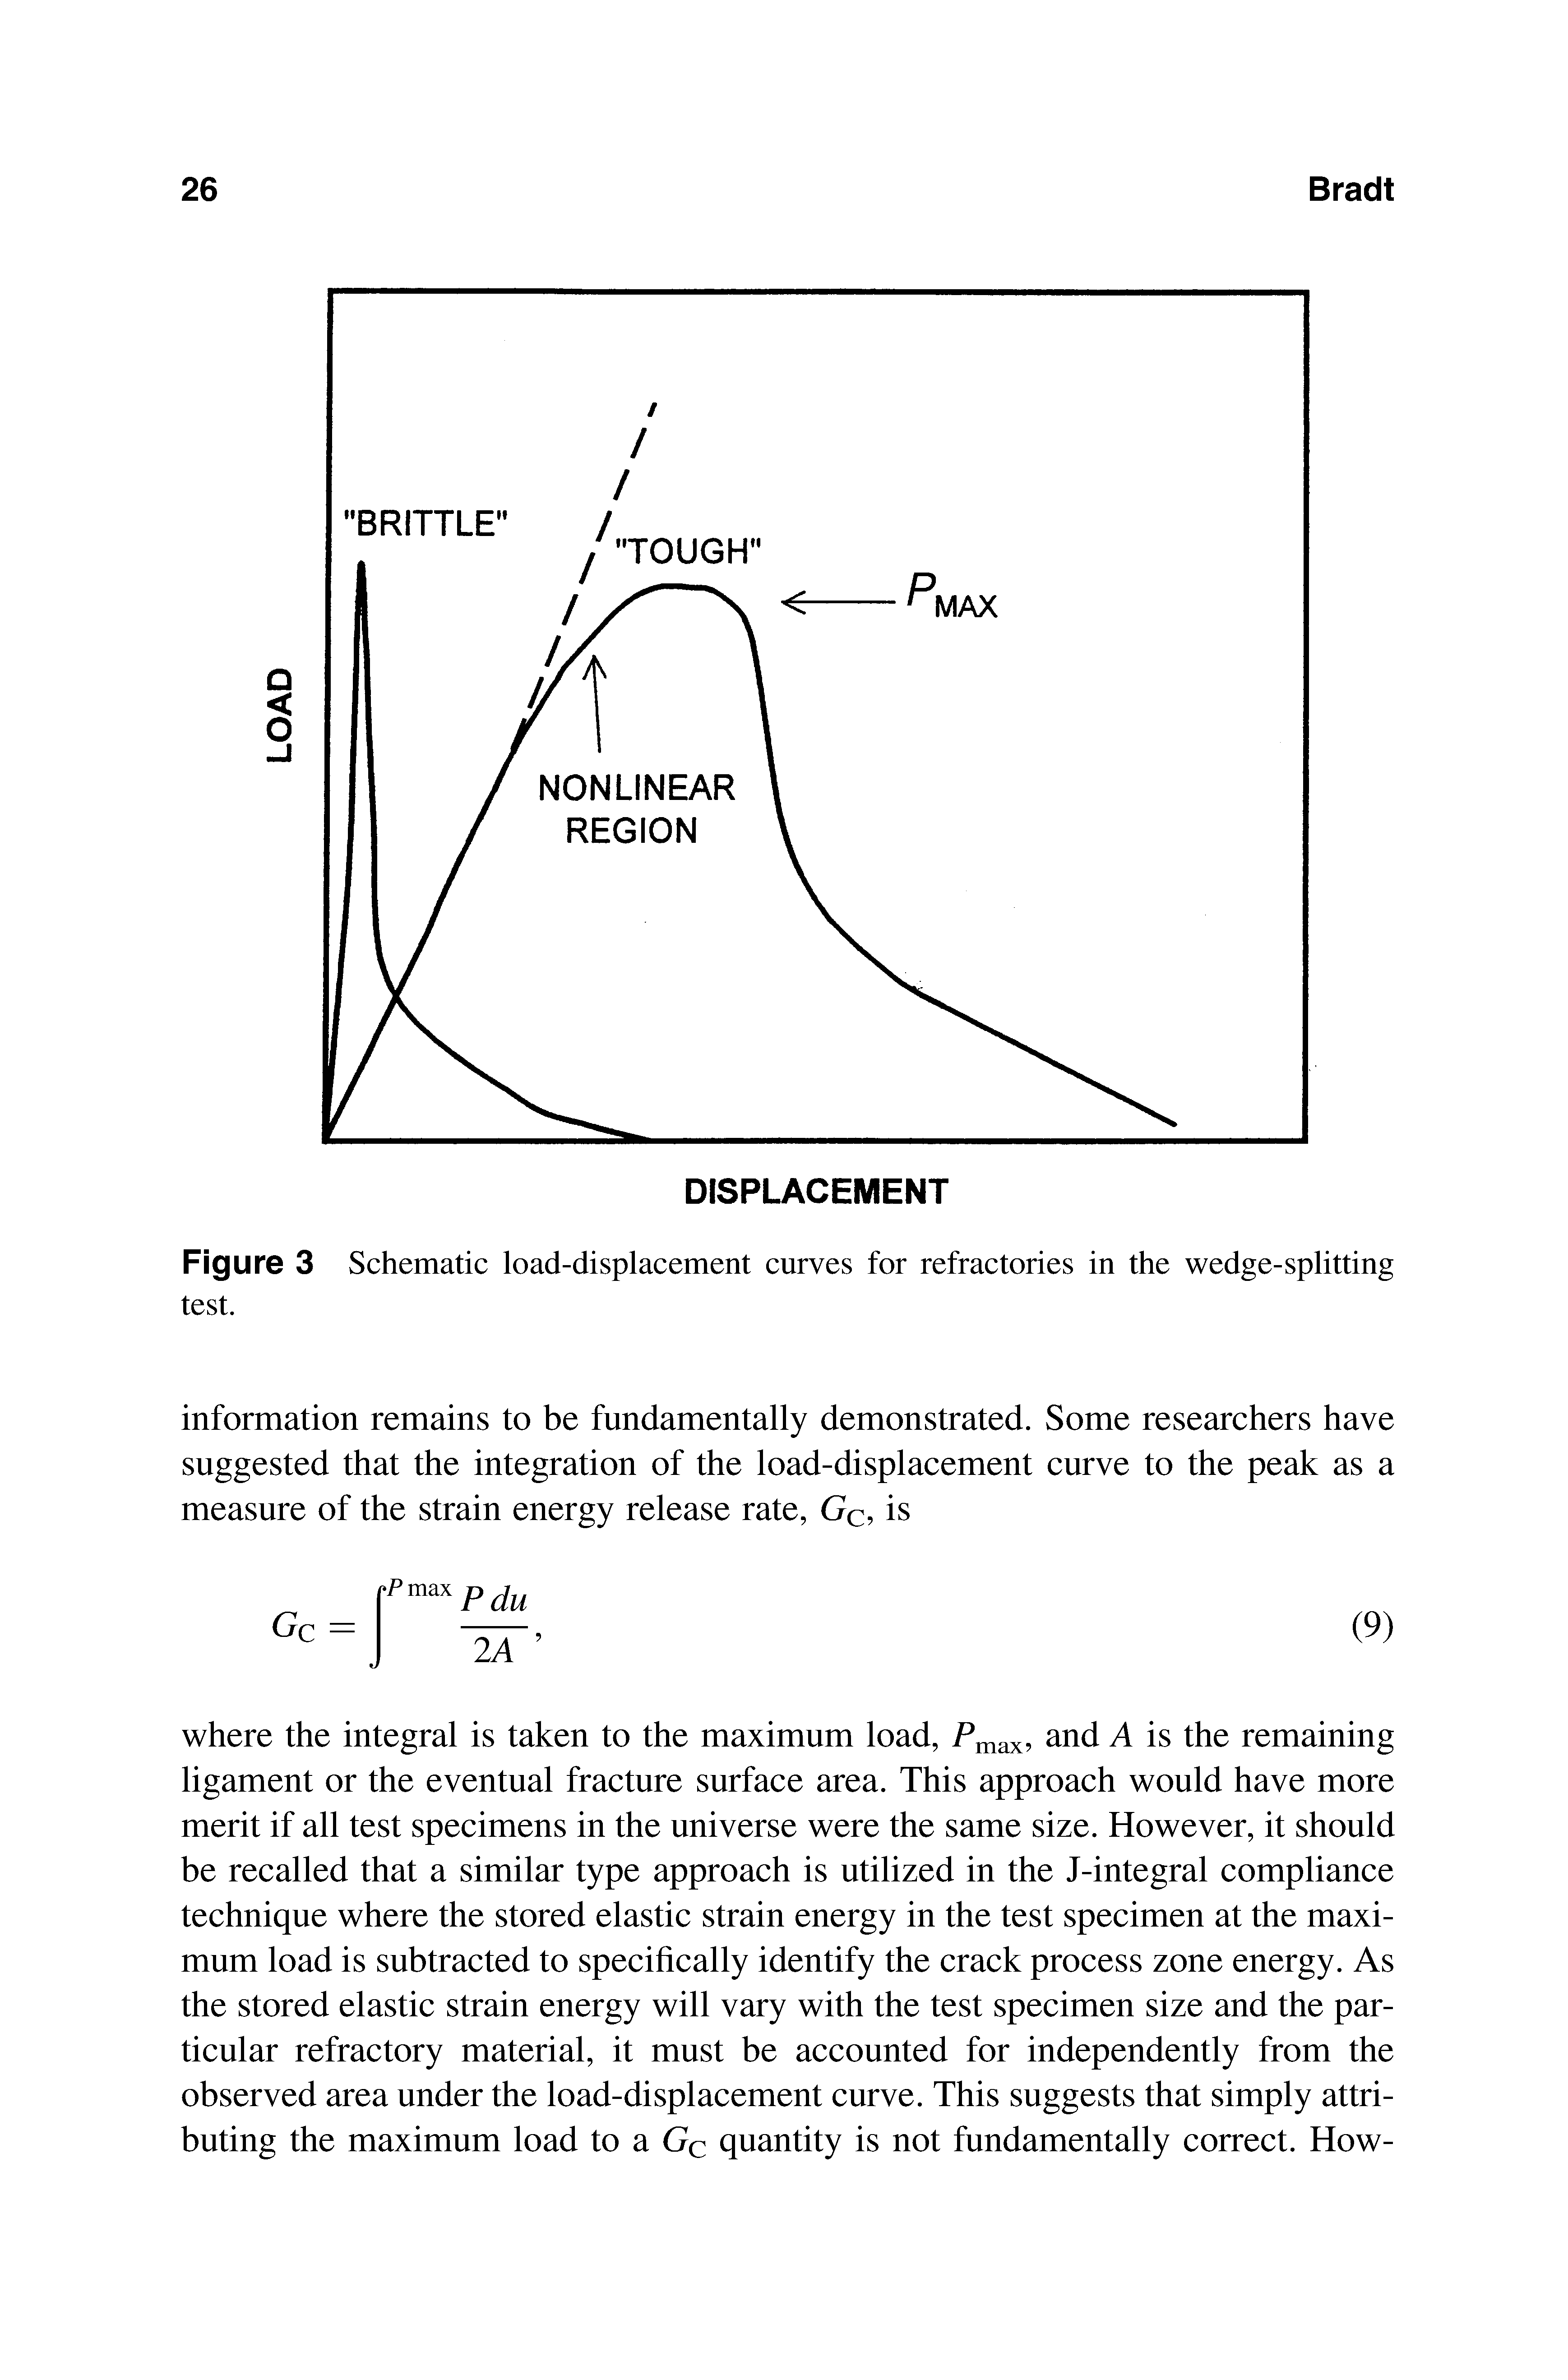 Figure 3 Schematic load-displacement curves for refractories in the wedge-splitting test.